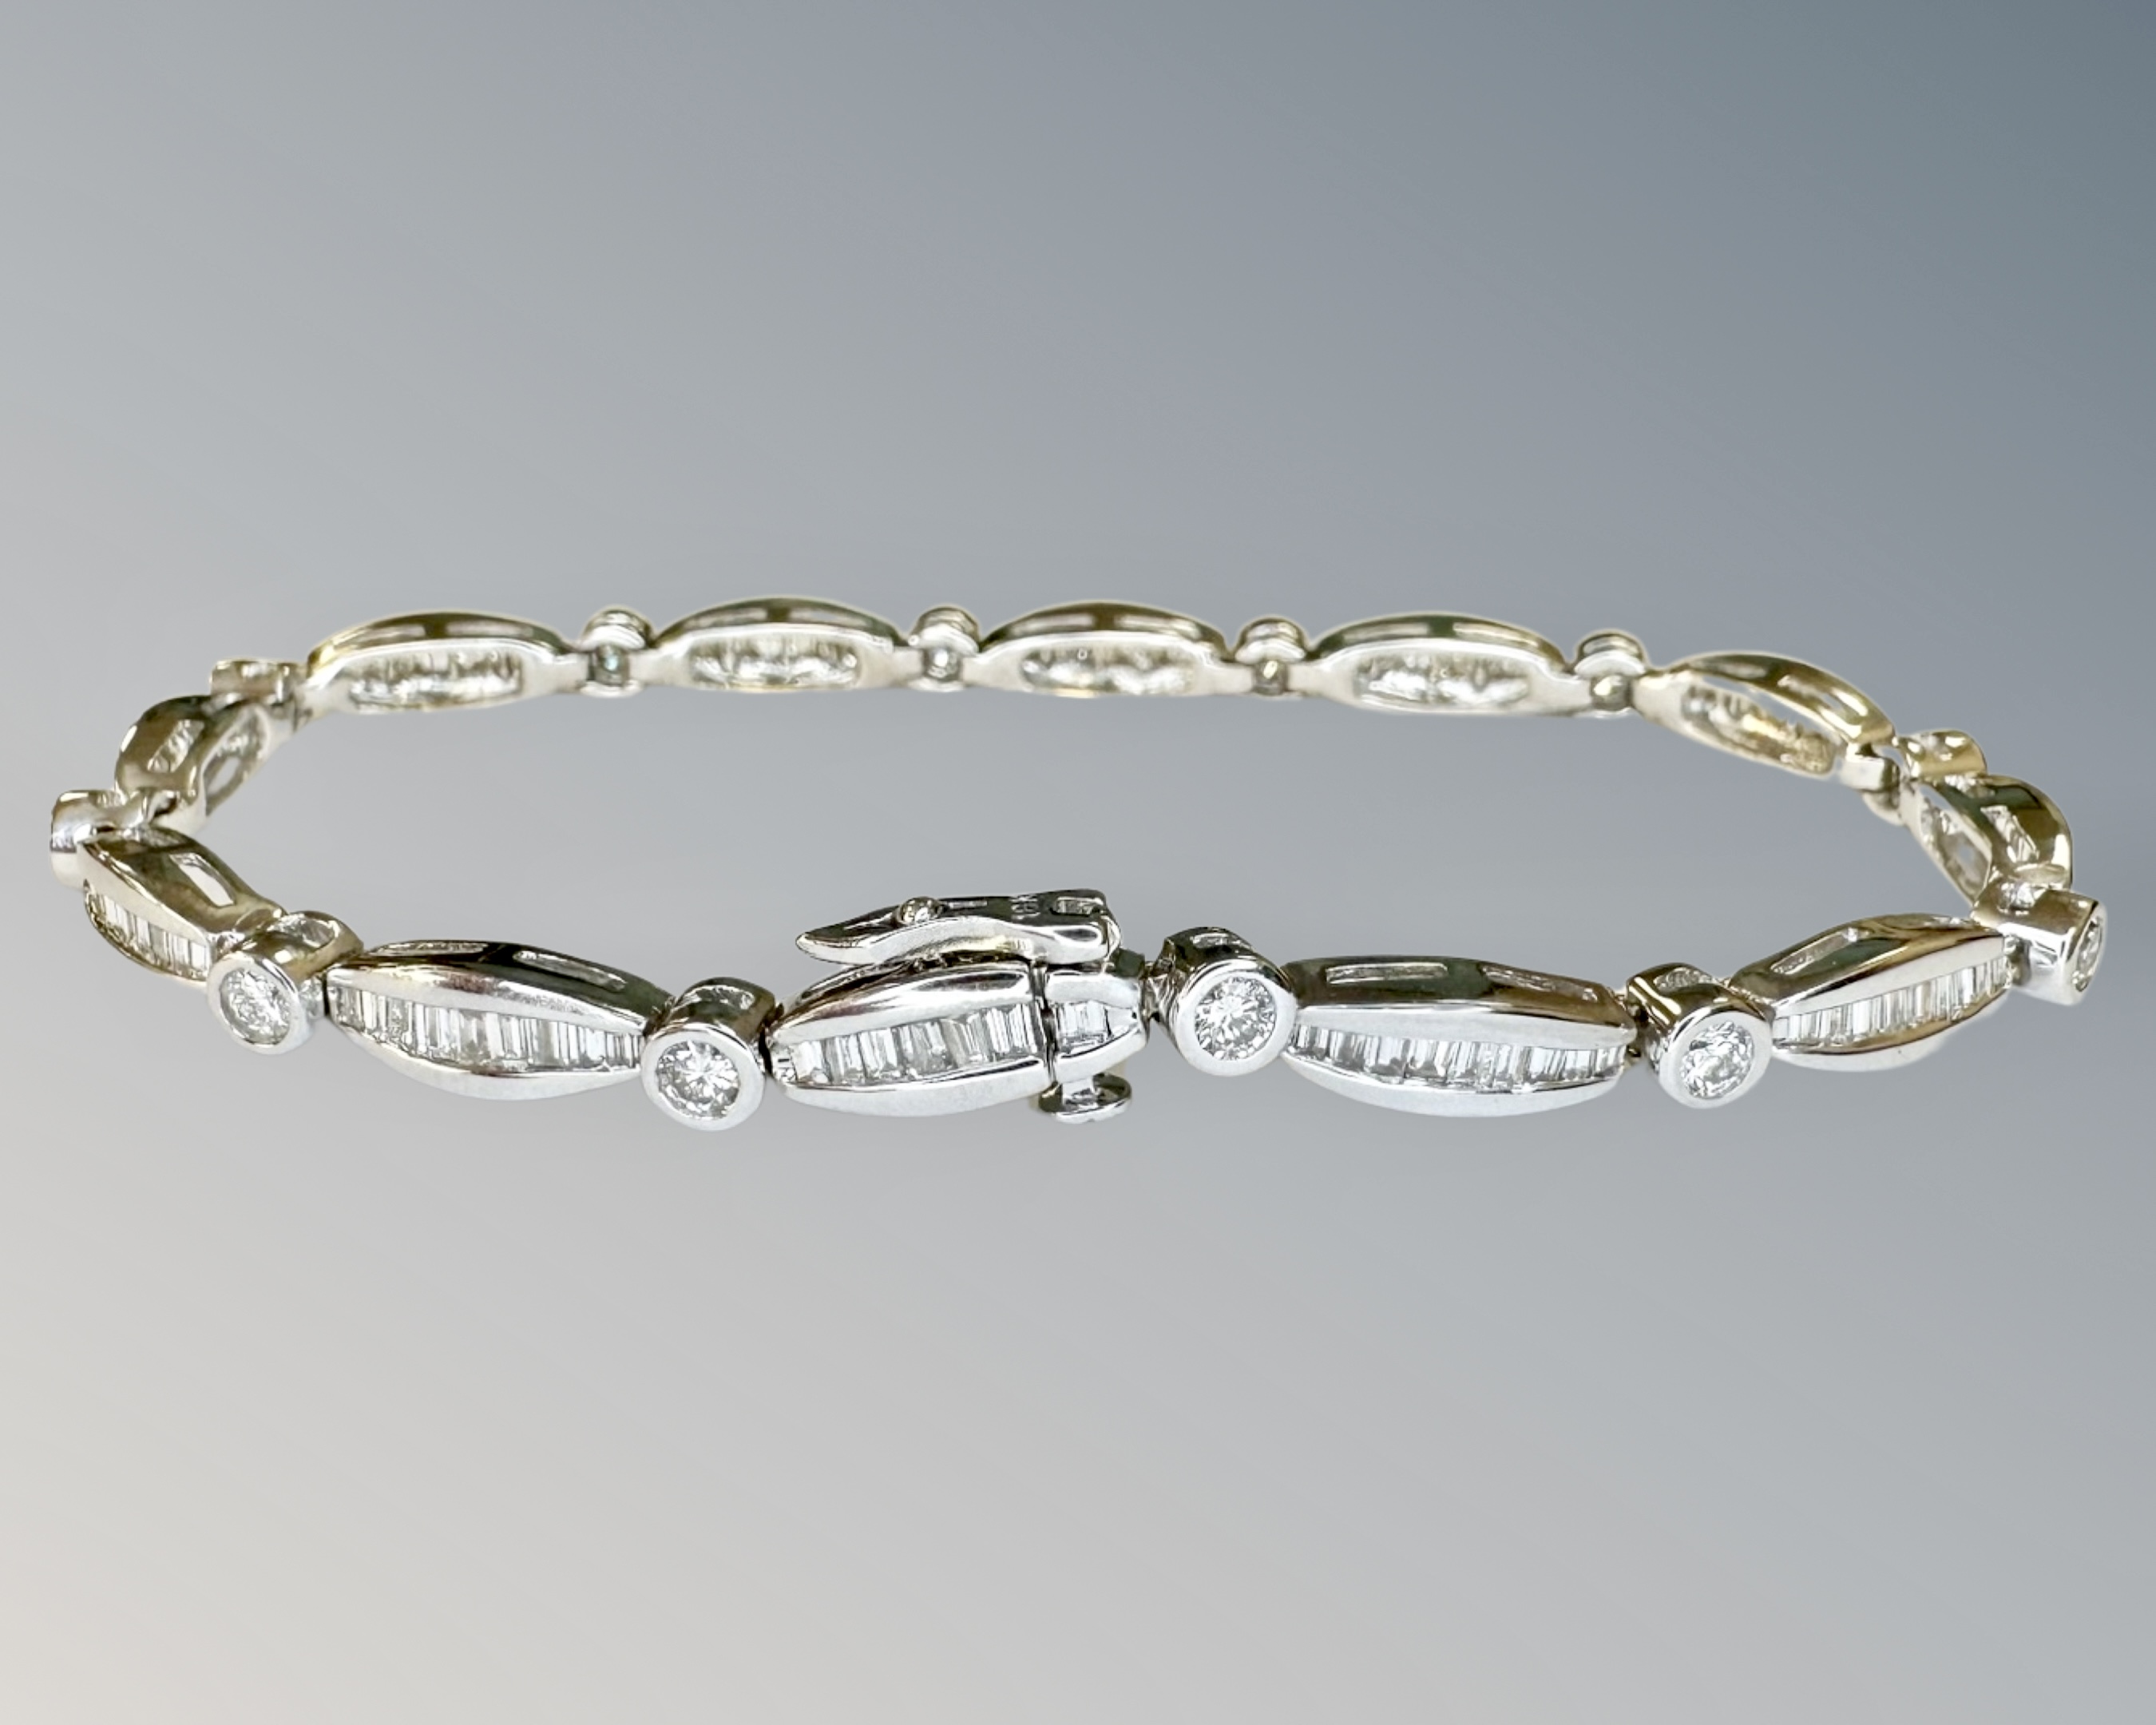 A 18ct white gold diamond bracelet set round and baguette stones, approximately 117 stones,